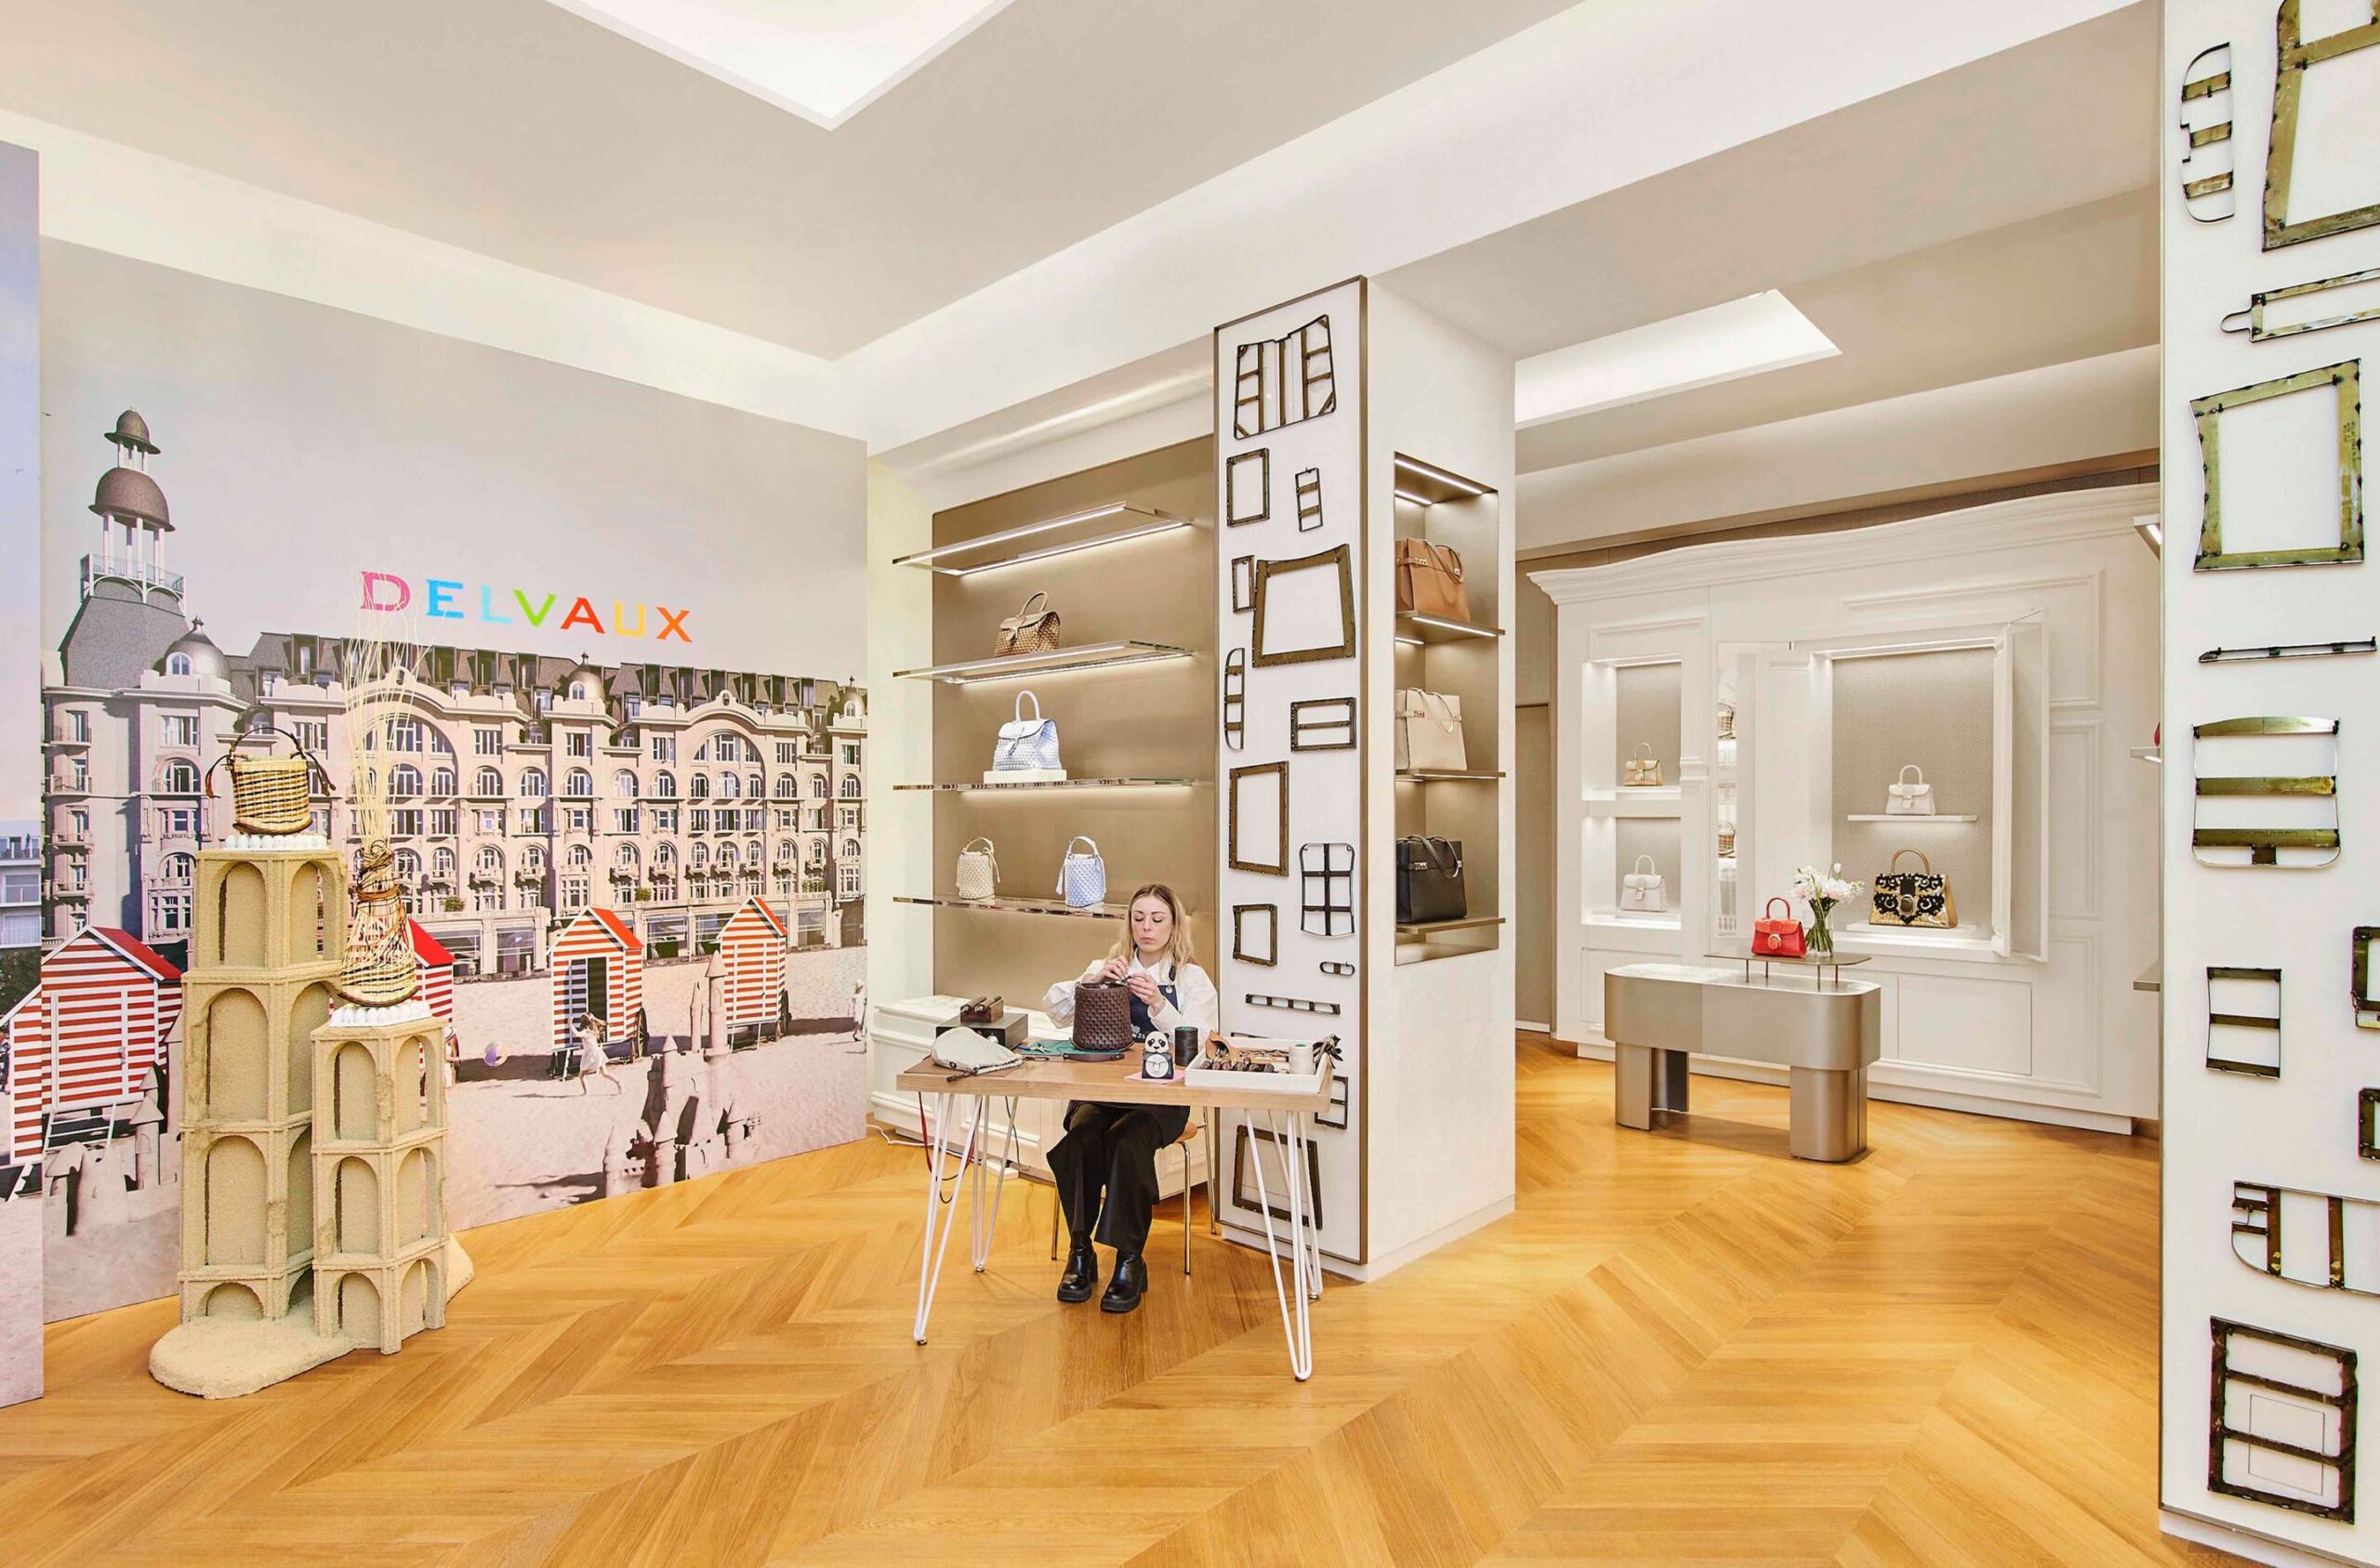 Belgian Luxury Leather Goods Brand Delvaux Launches First Artisan Journey in China in Chengdu